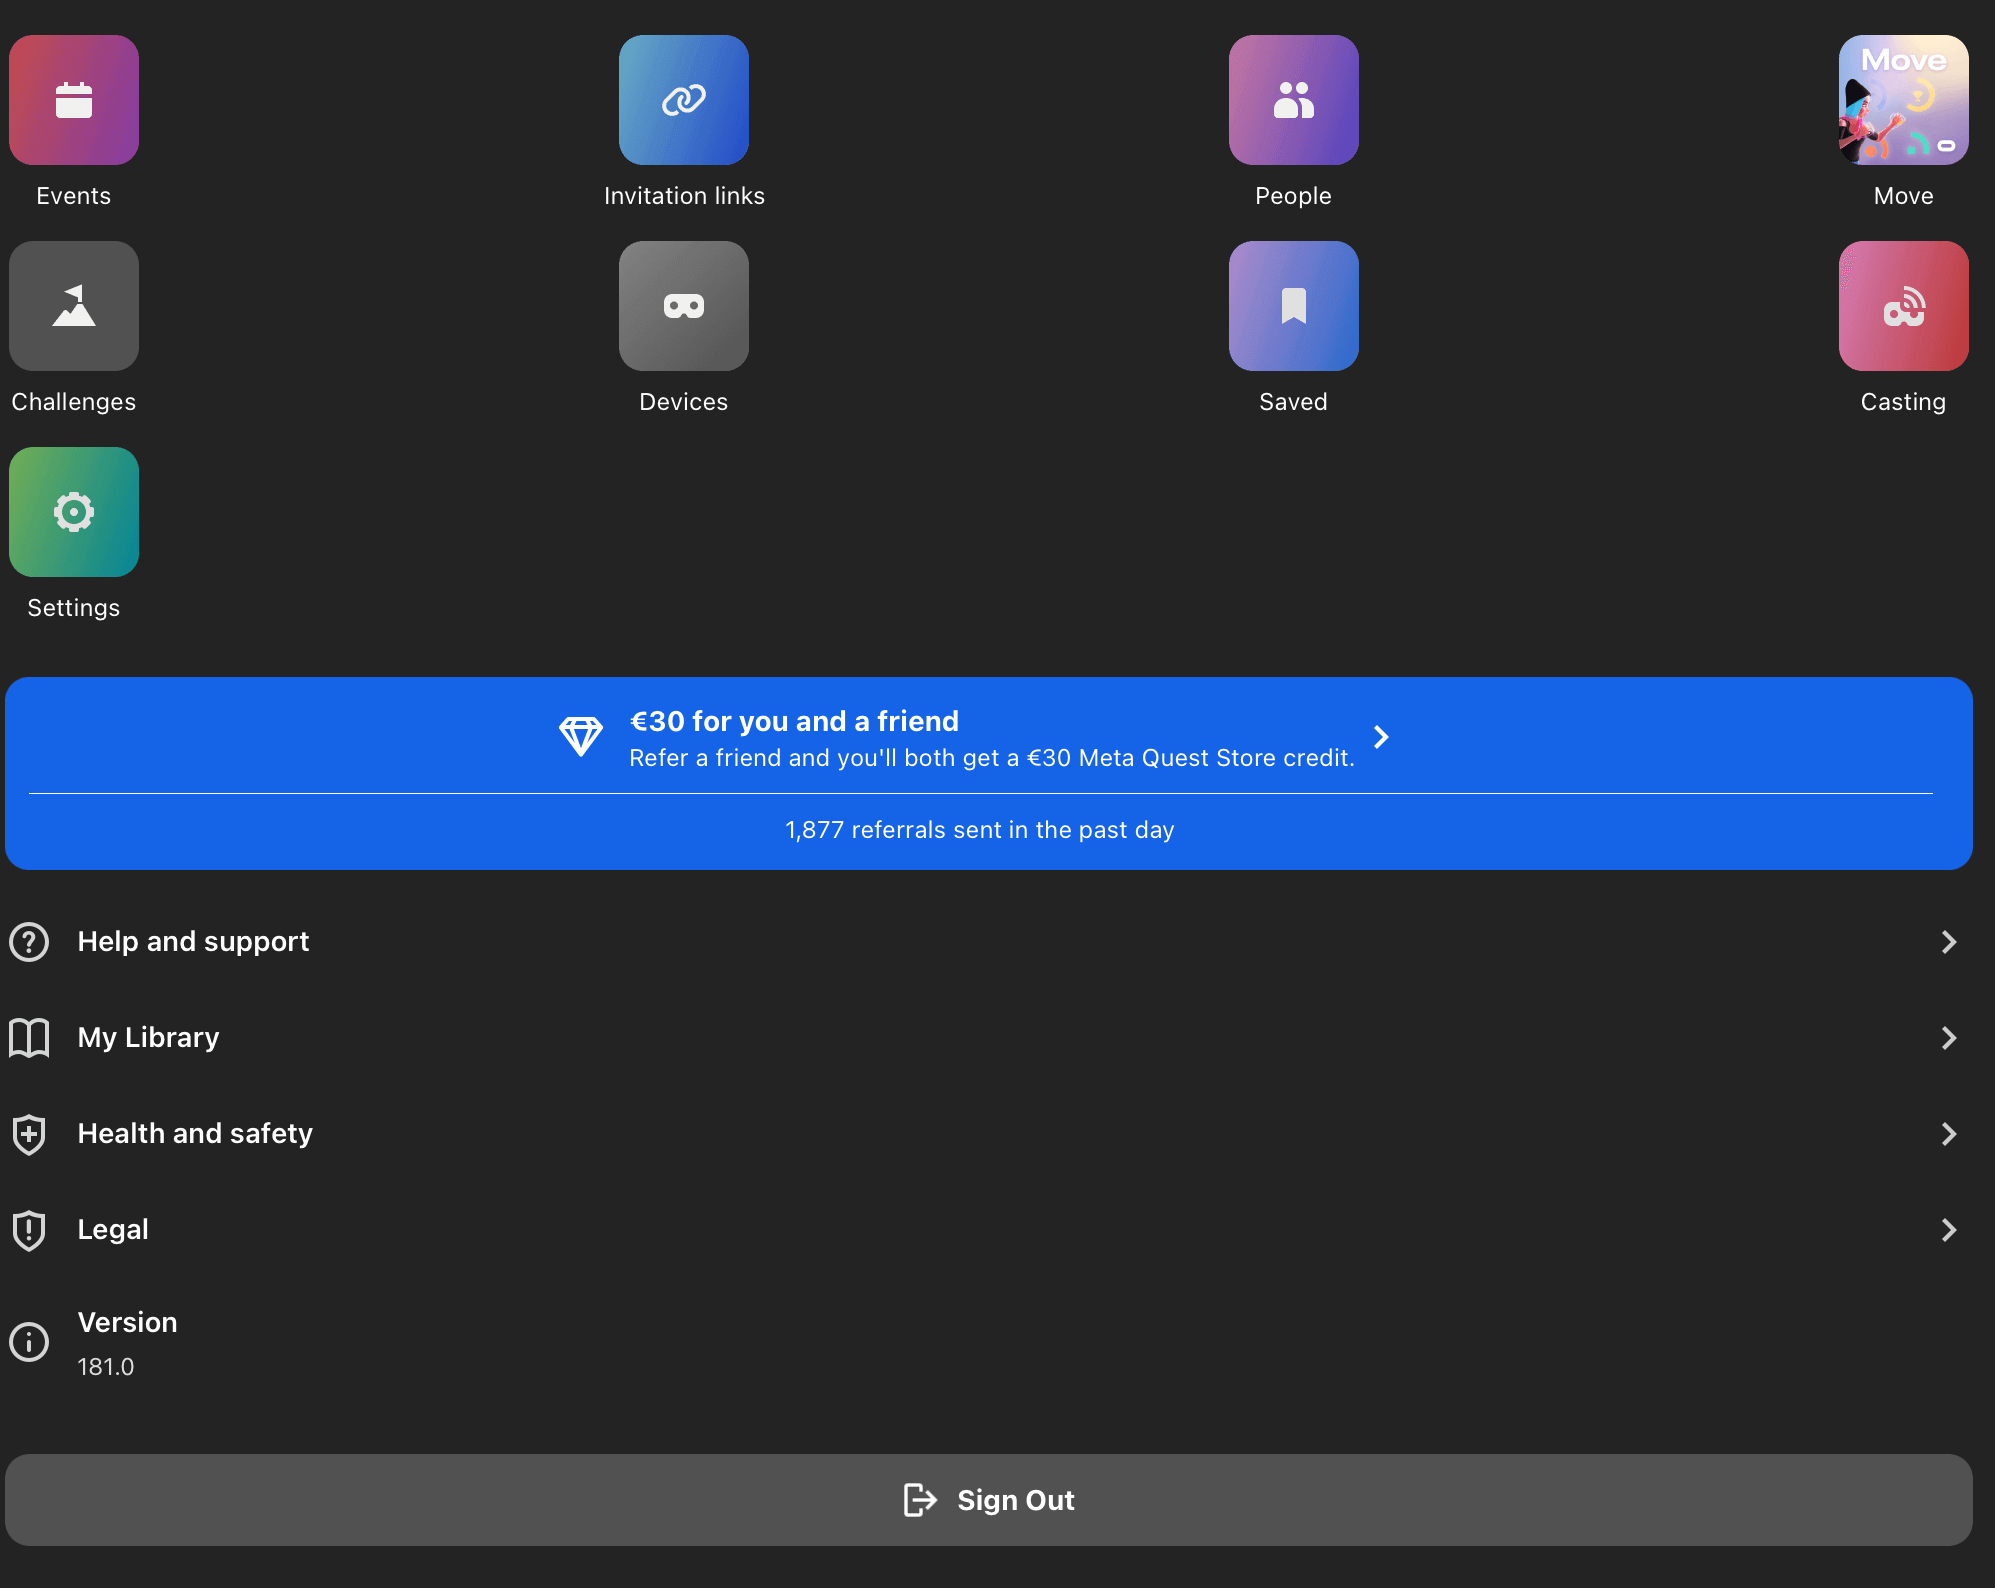 On your connected device, go to "Settings" and select the "Apps" or "Applications" option.
Find the Oculus Quest app and open its settings.